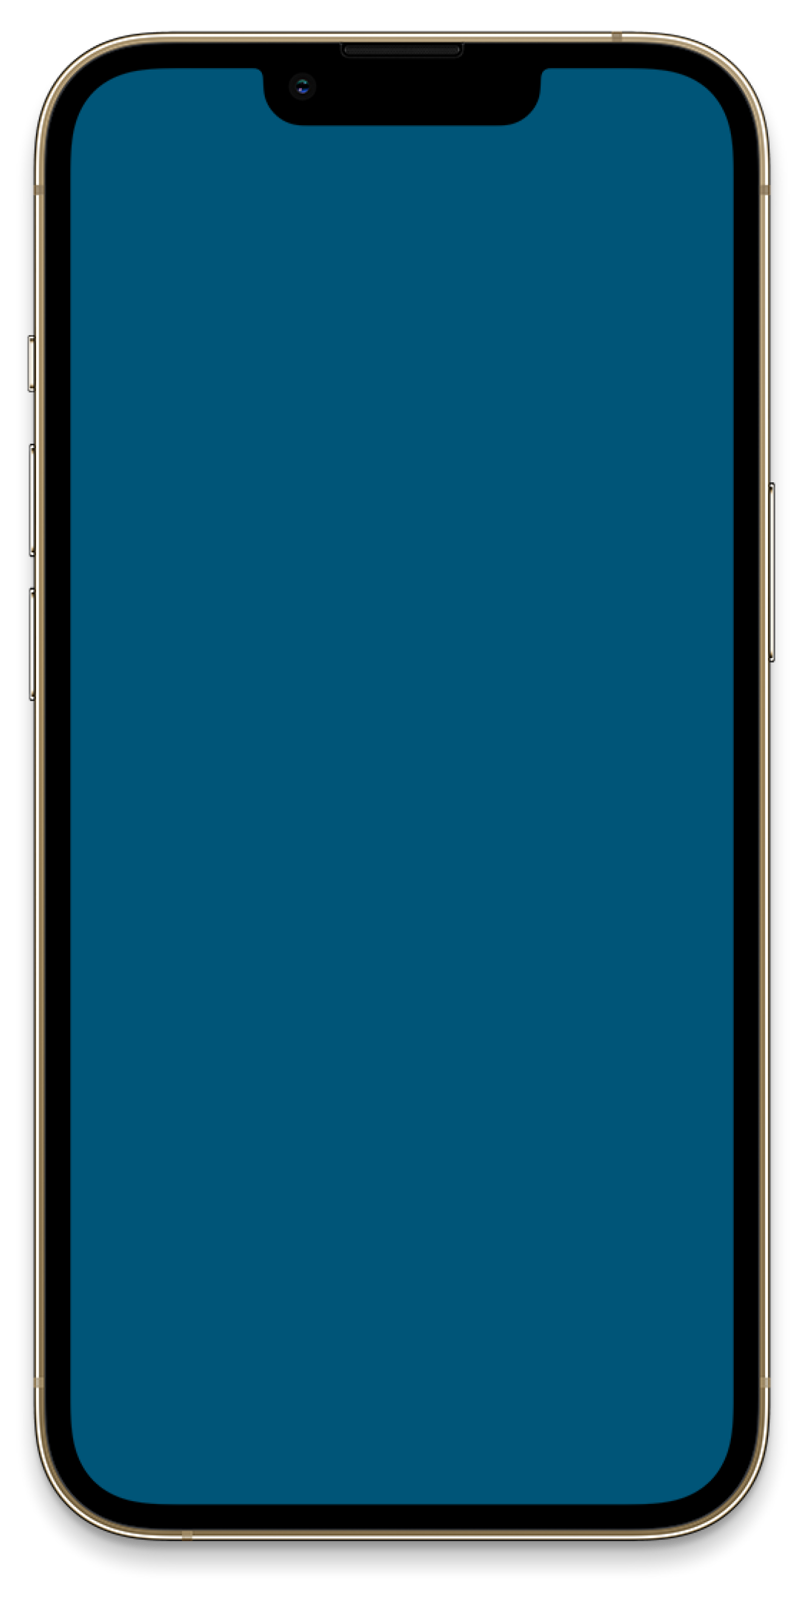 iPhone outline